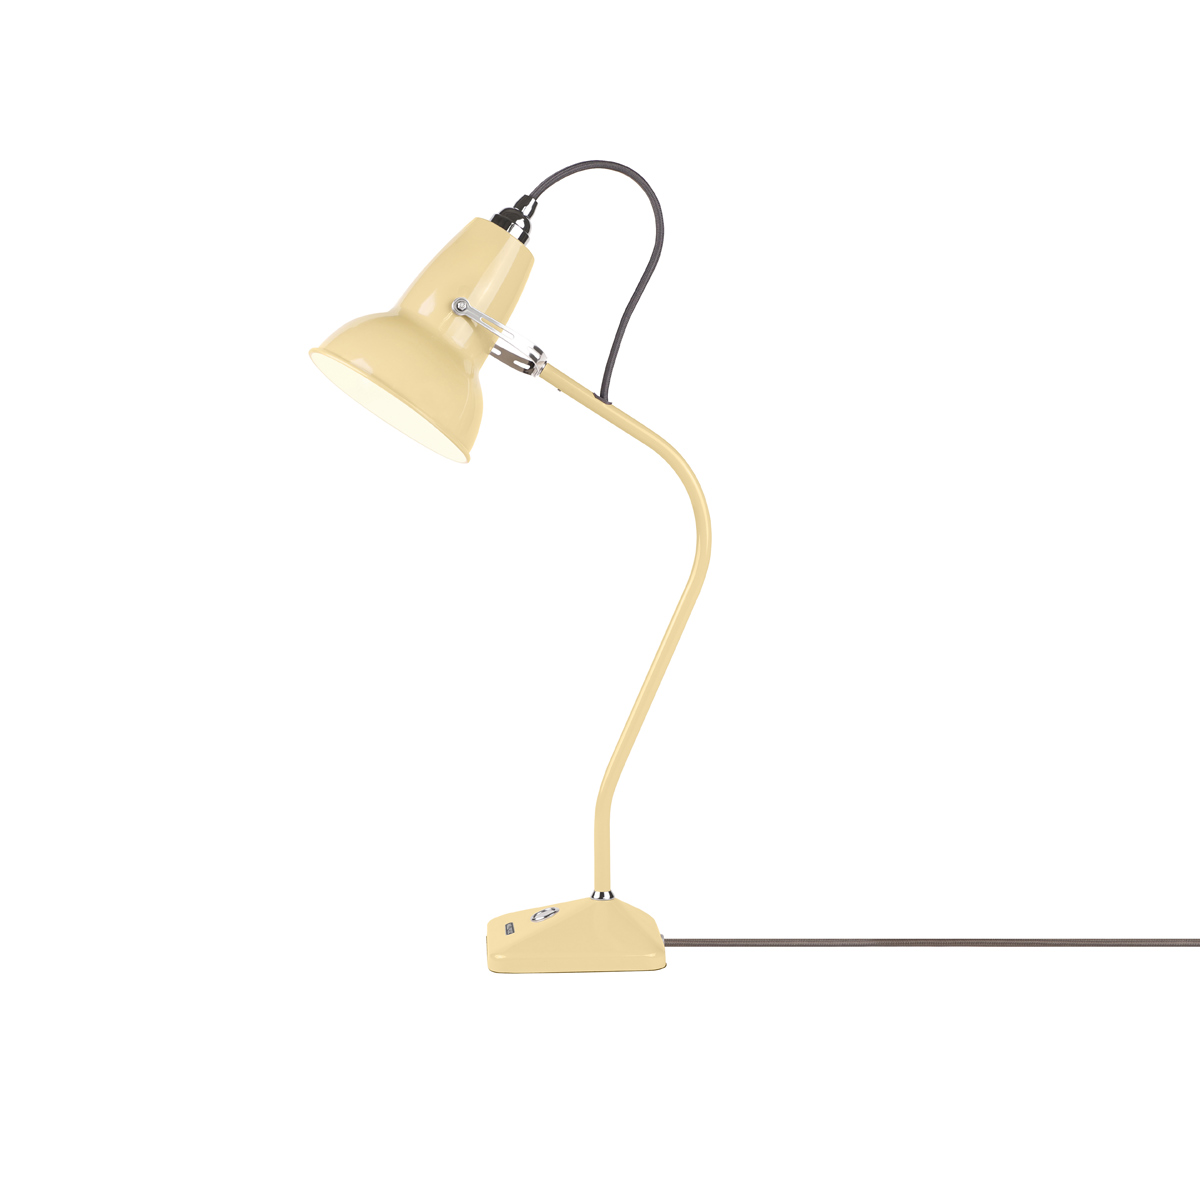 An image of Anglepoise Table Lamp, National Trust Buttermilk Yellow